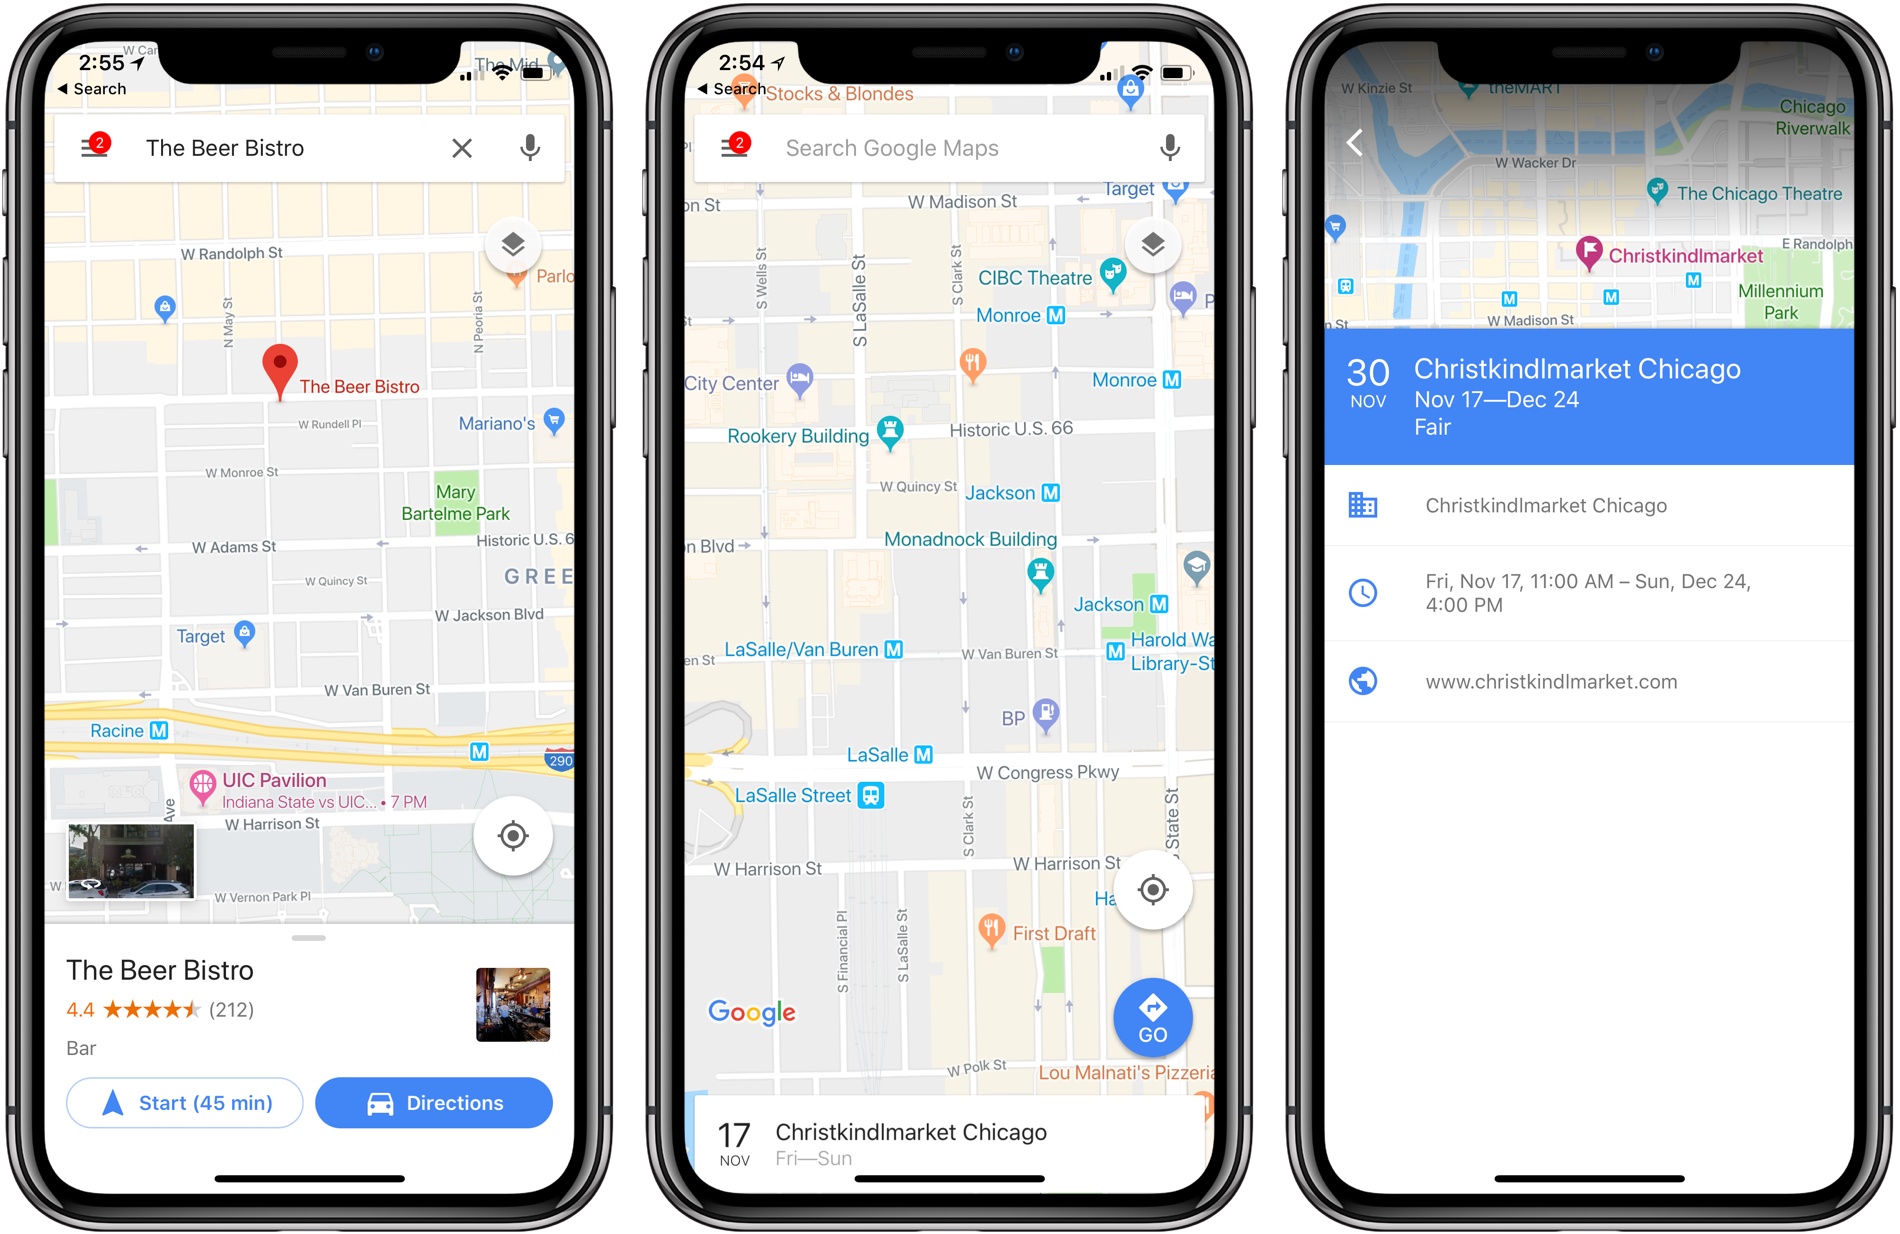 Google Maps on the iPhone X